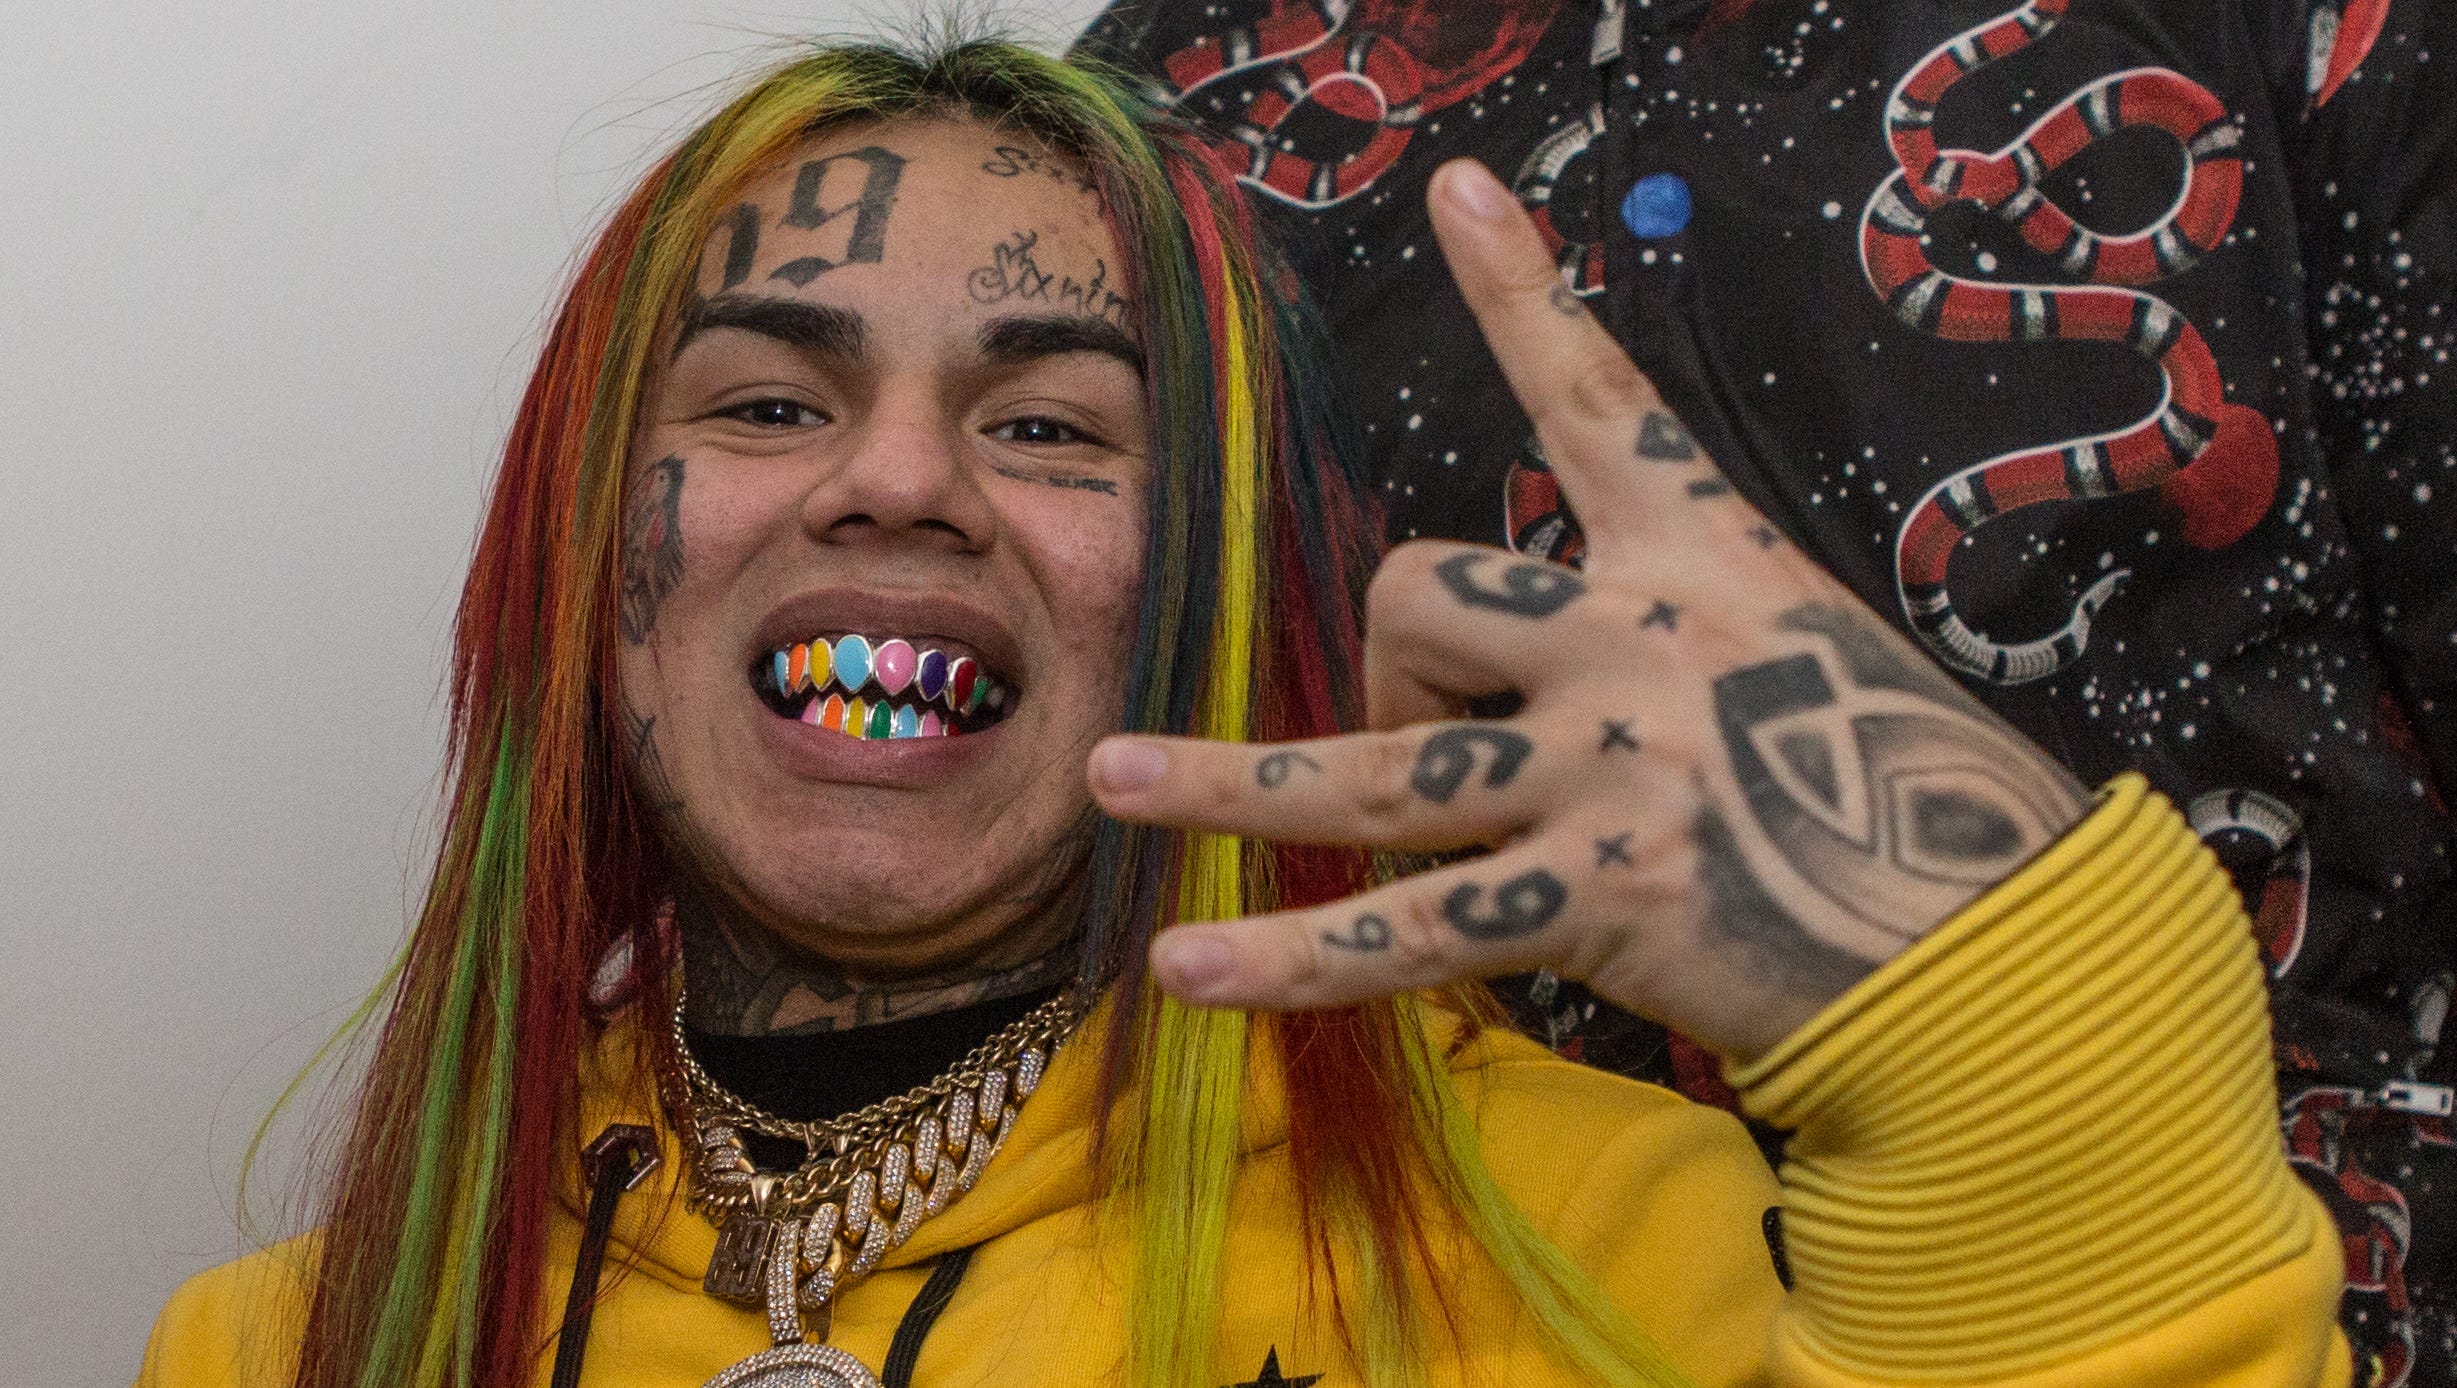 The rapper known as Tekashi69 says two men forced him from a car at a New Y...